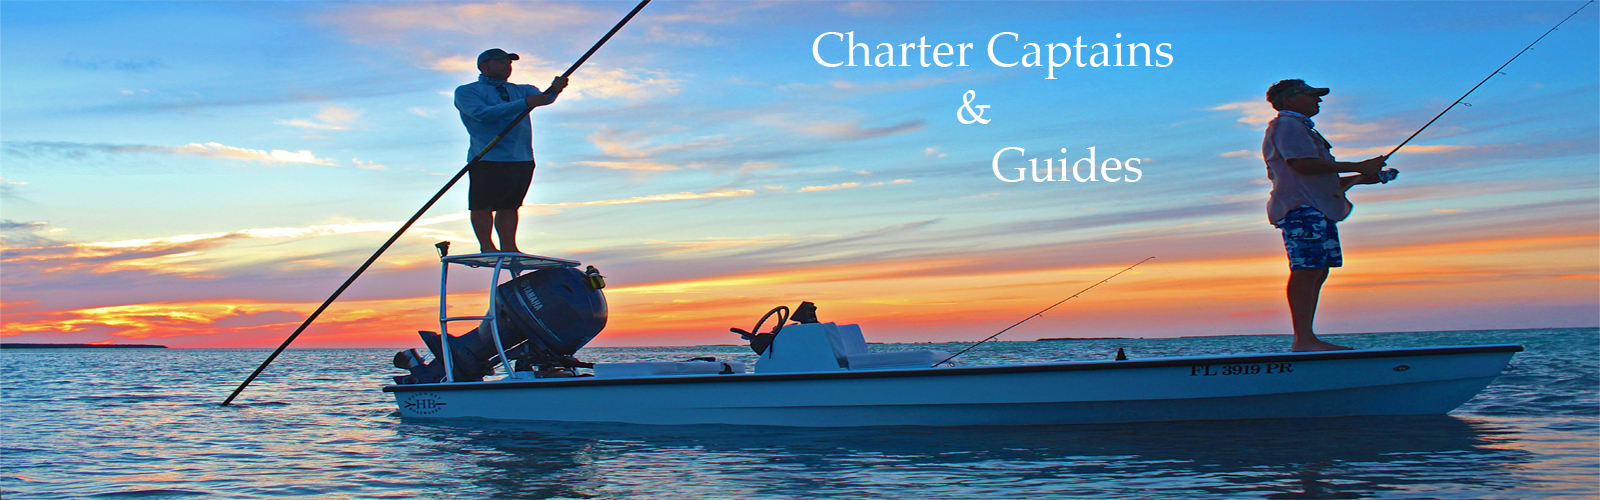 10 Best Snook & Tarpon Charters South Florida Captains Guides in Fl